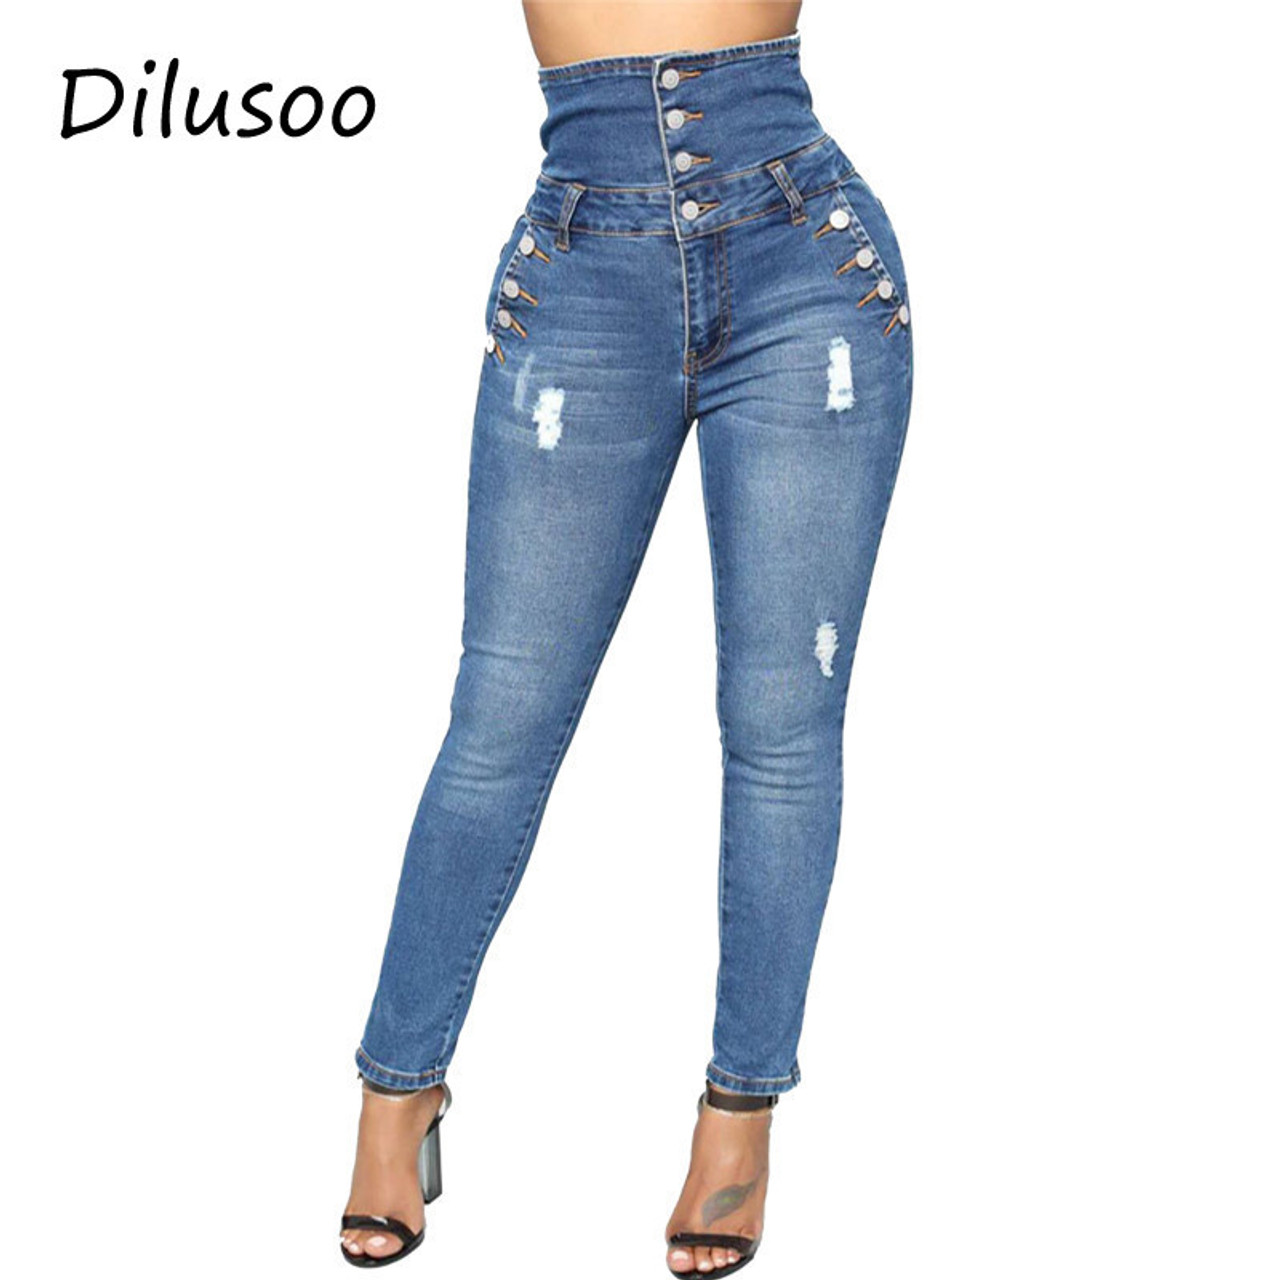 Woman`s in slim fit jeans stock image. Image of rear - 169908263